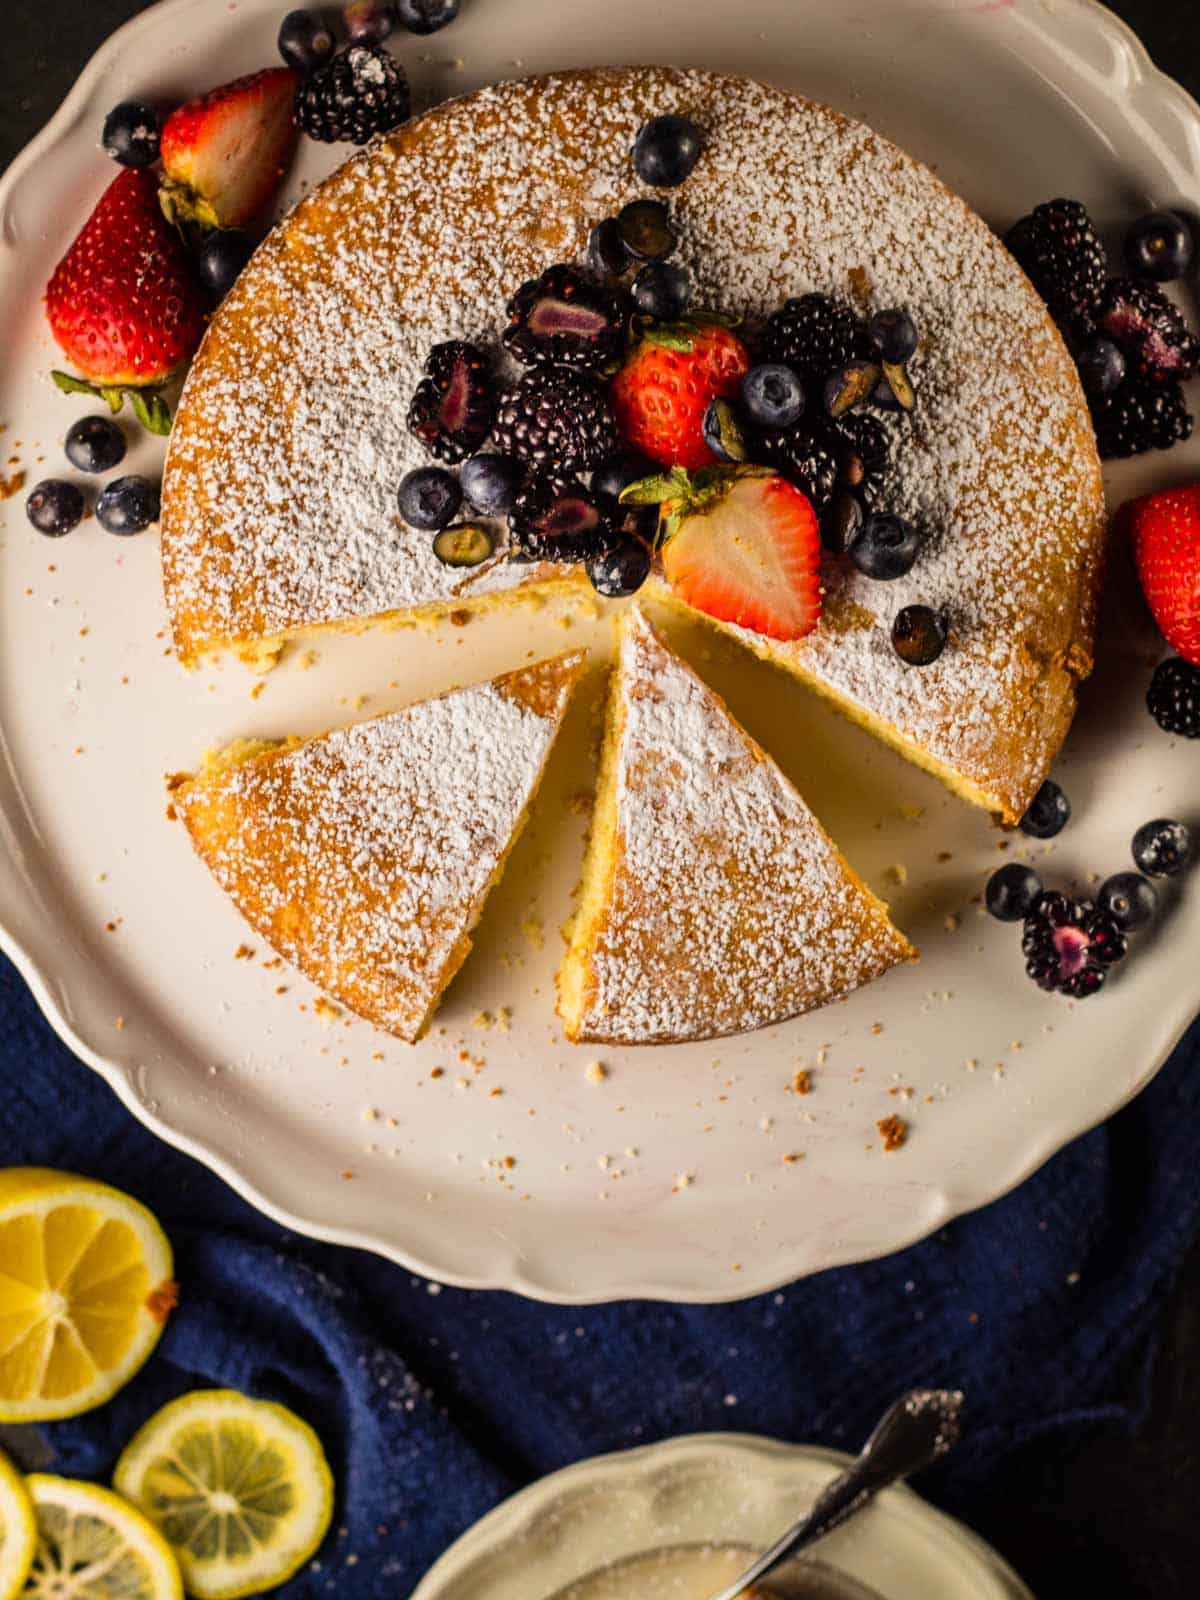 round cake covered in powdered sugar and berries with two slices cut from it